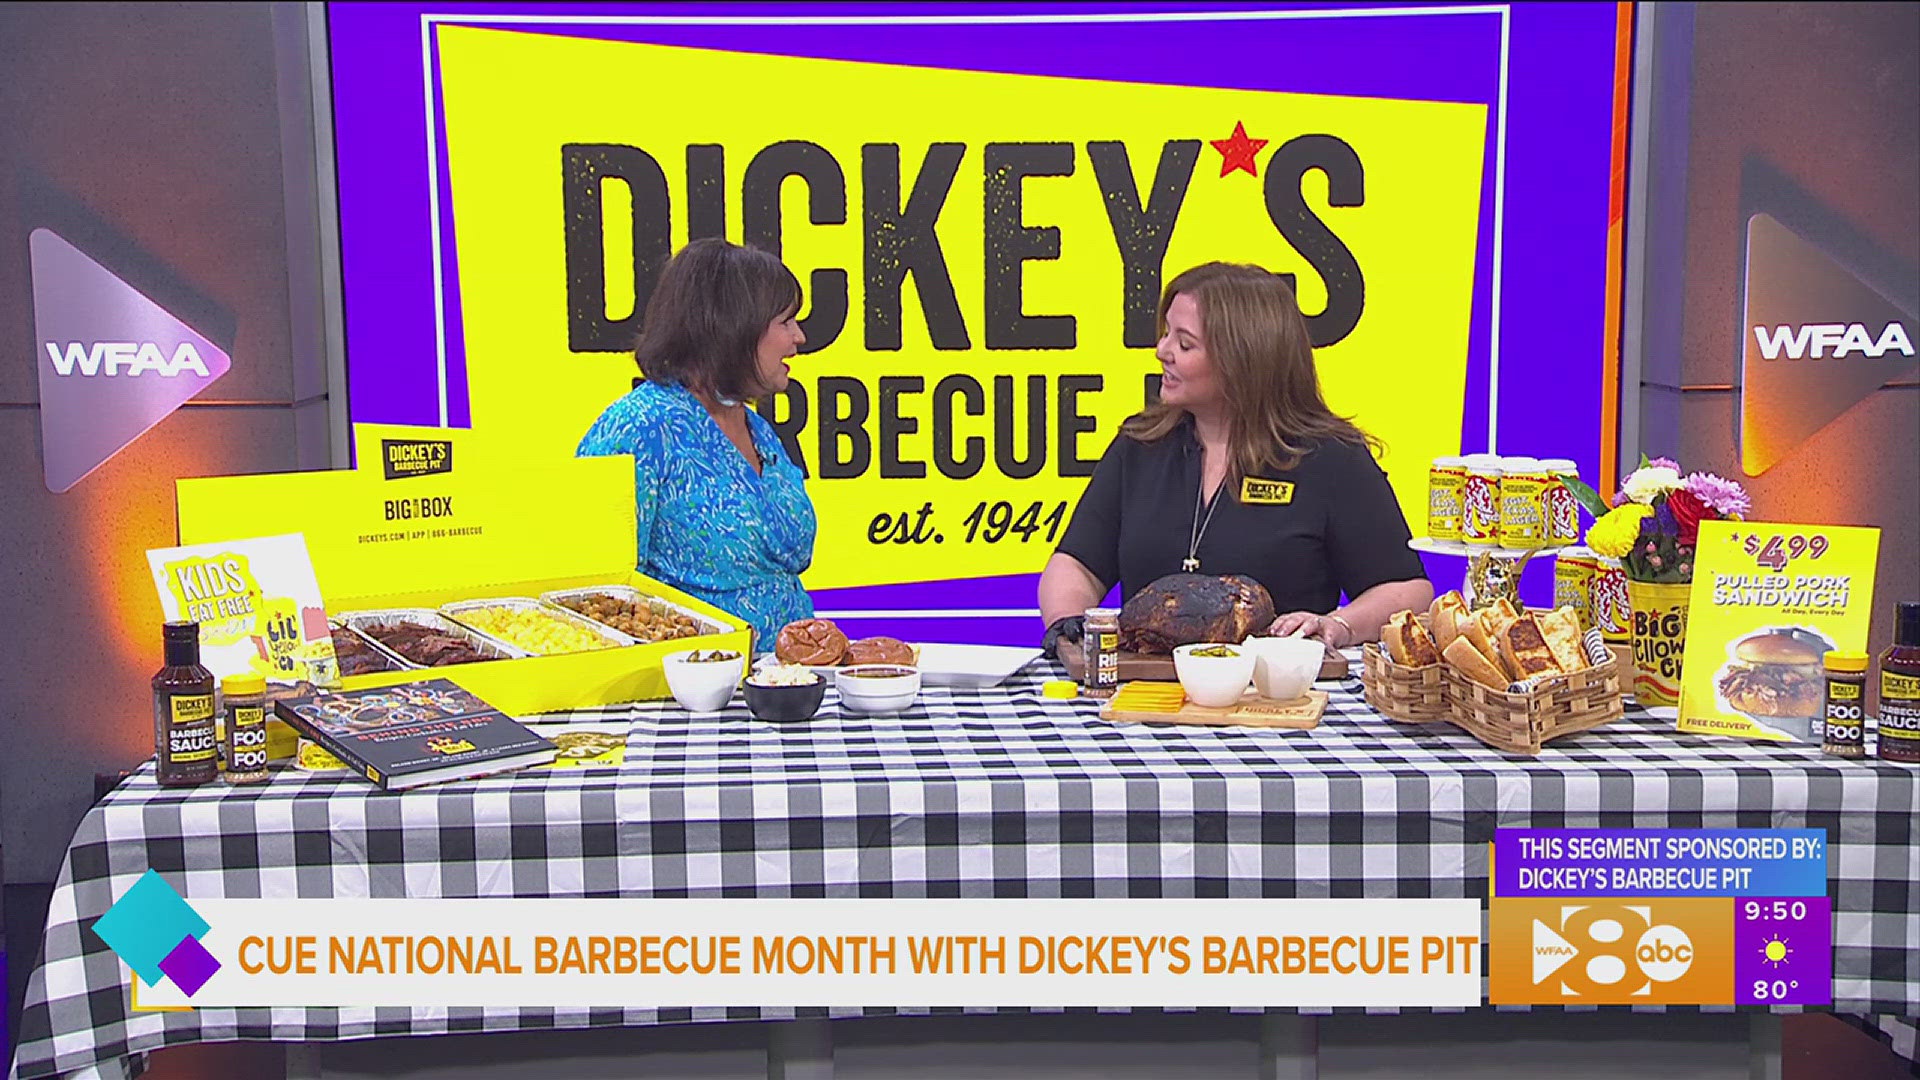 This segment is sponsored by: Dickey's Barbecue Pit